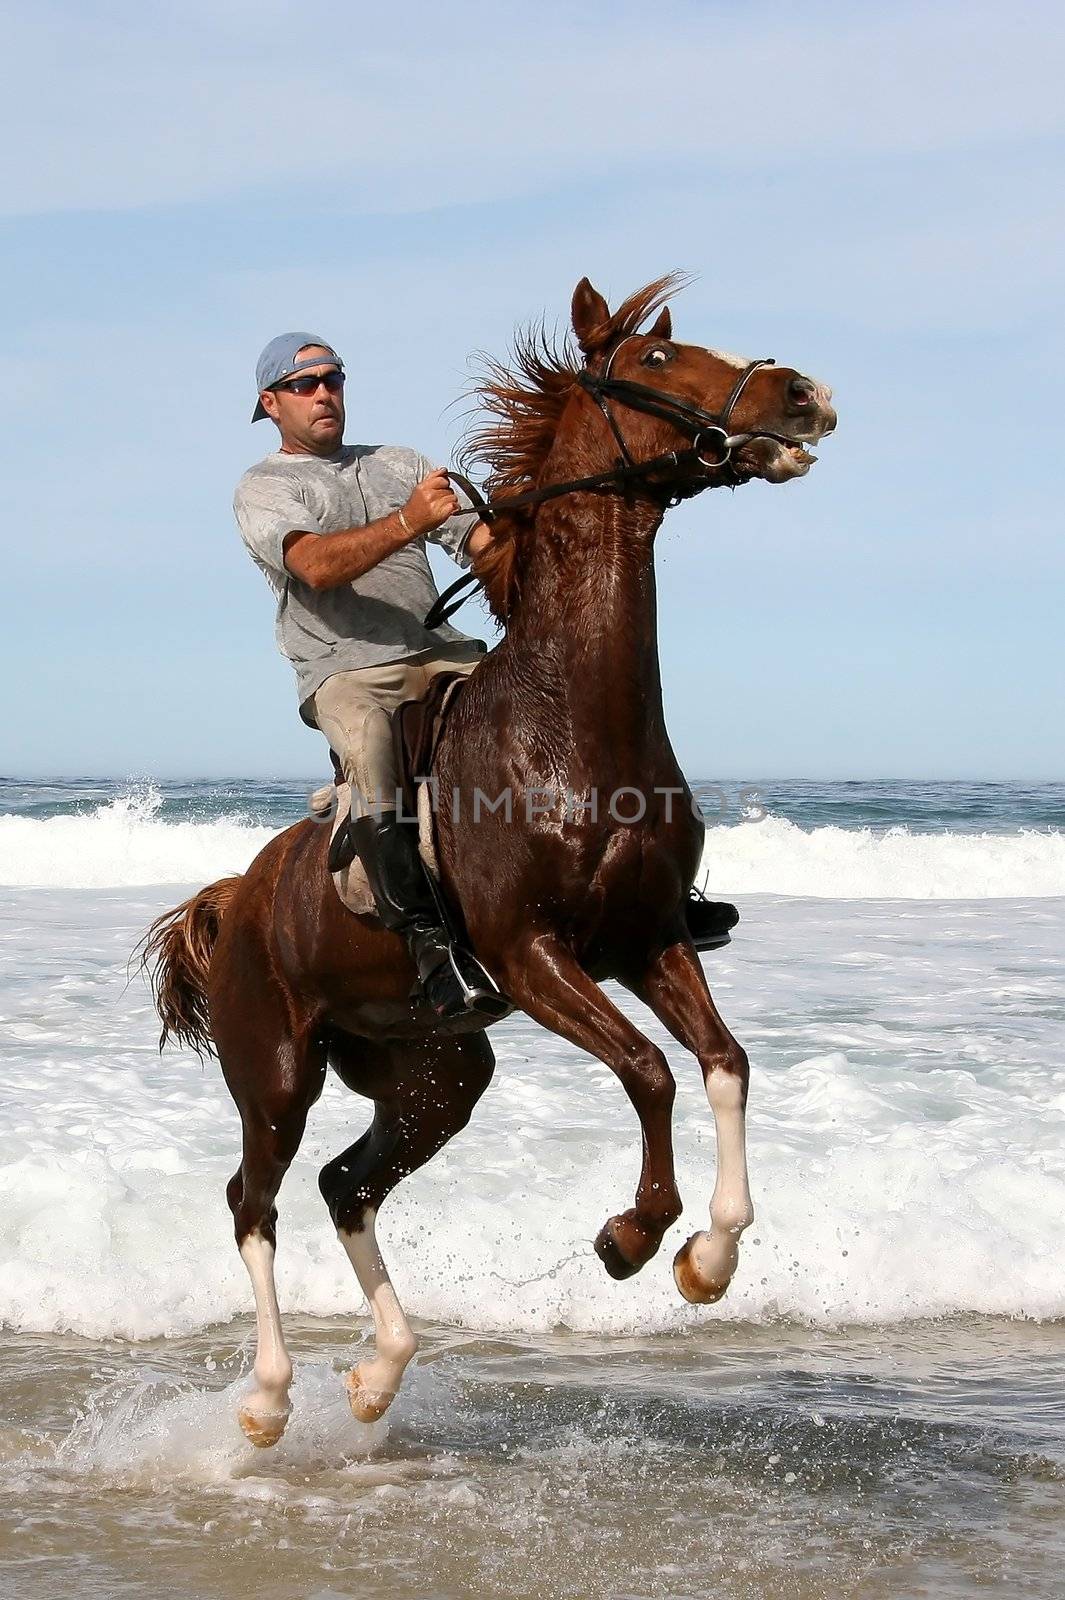 Jumping horse and rider in the water at the beach